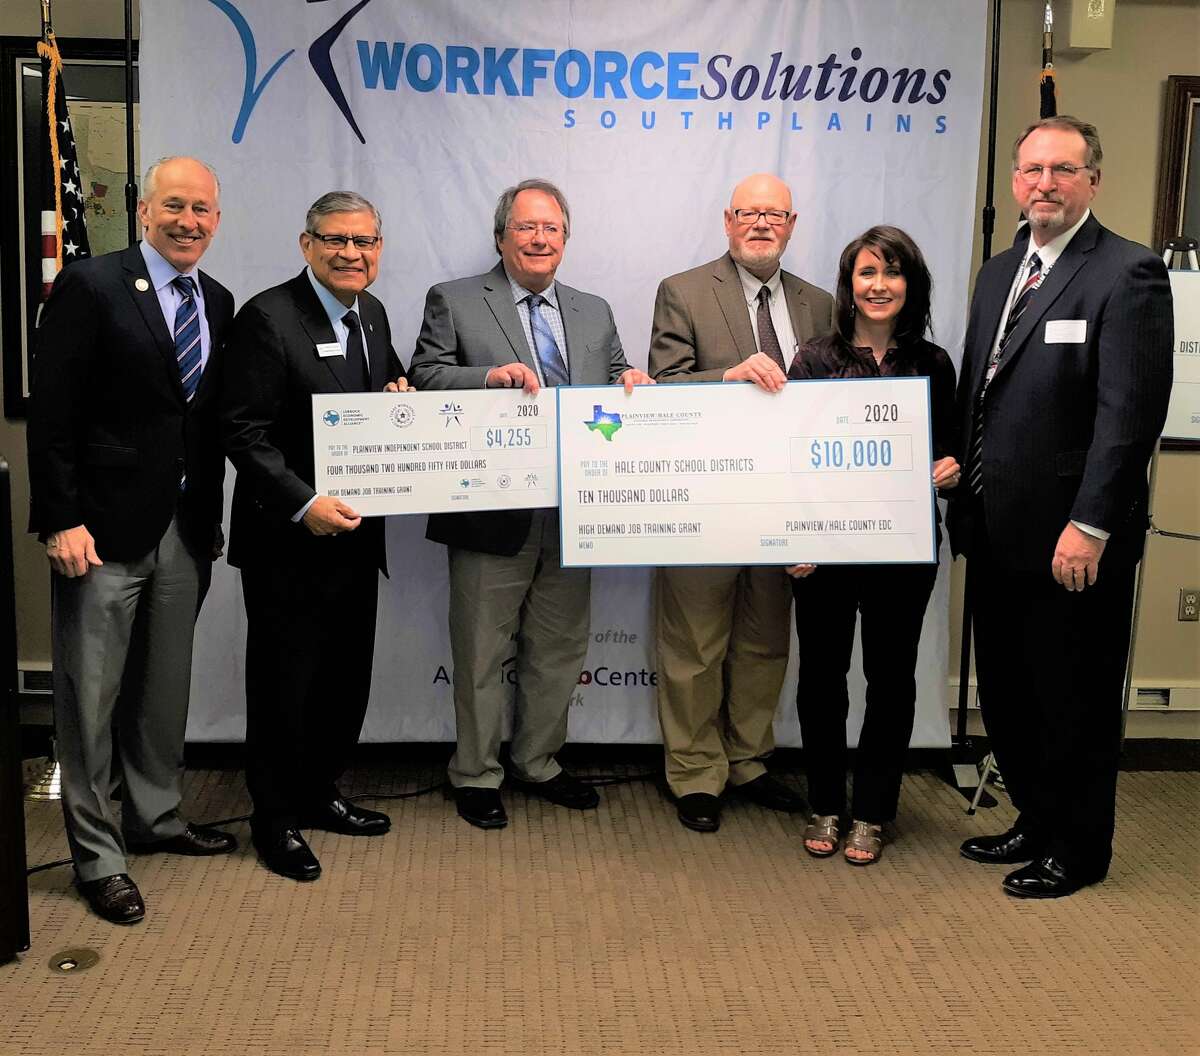 Officials with Plainview ISD and the Plainview Hale County Economic Development Corporation accept checks for Plainview ISD’s CTE programs from Workforce Solutions South Plains. Pictured (L-R): Lubbock Mayor Dan Pope, WSSP CEO Martin Aguirre, WSSP Board Chairman Chuck Smith, Plainview-Hale County EDC Executive Director Mike Fox, PISD director of secondary teaching and learning Robin Straley, and Brant Reagan, Plainview High School principal